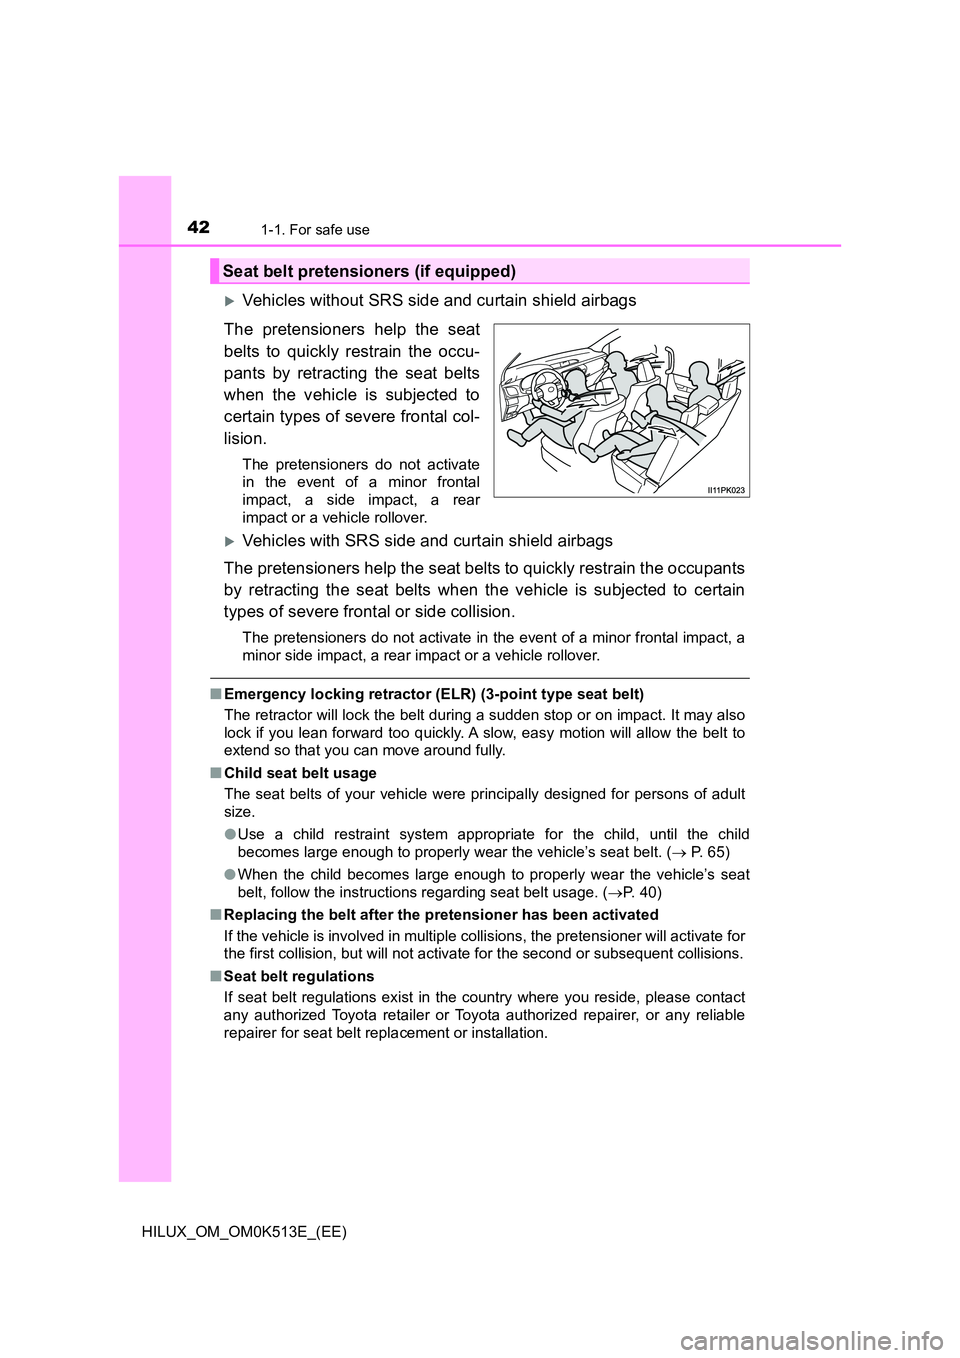 TOYOTA HILUX 2021  Owners Manual (in English) 421-1. For safe use
HILUX_OM_OM0K513E_(EE)
Vehicles without SRS side and curtain shield airbags 
The pretensioners help the seat 
belts to quickly restrain the occu- 
pants by retracting the seat b